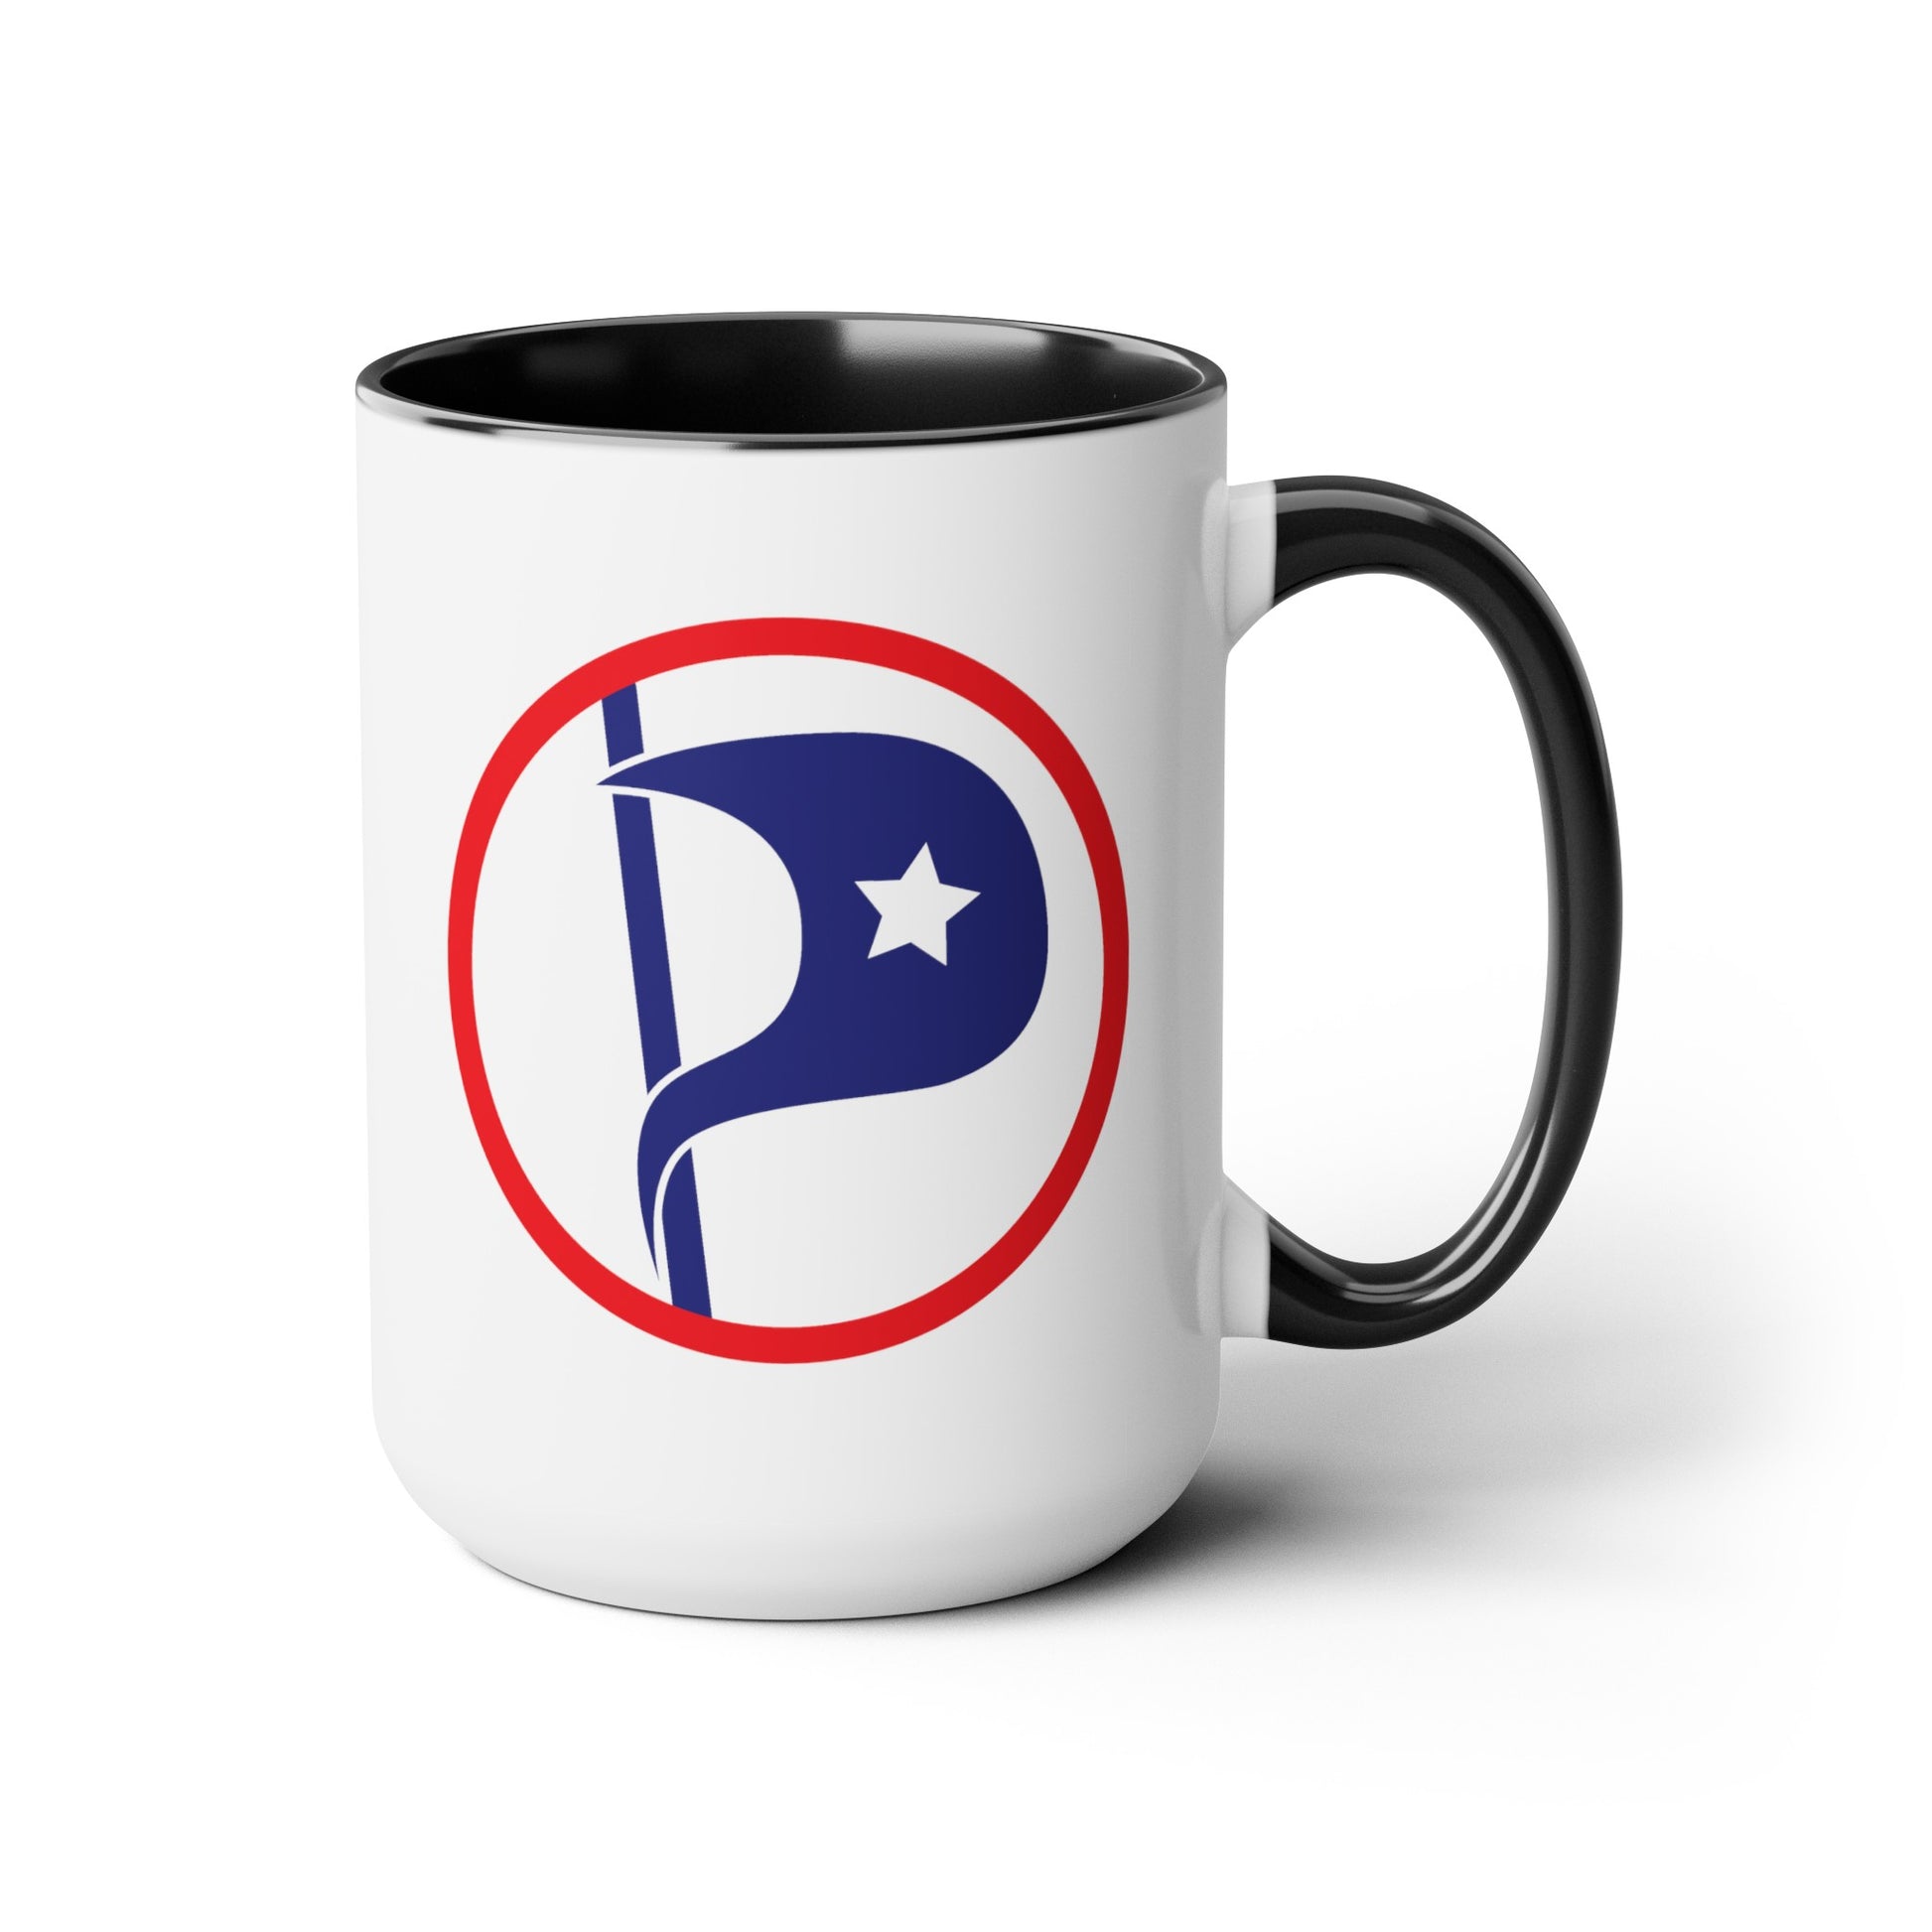 US Pirate Party Coffee Mug - Double Sided Black Accent White Ceramic 15oz by TheGlassyLass.com